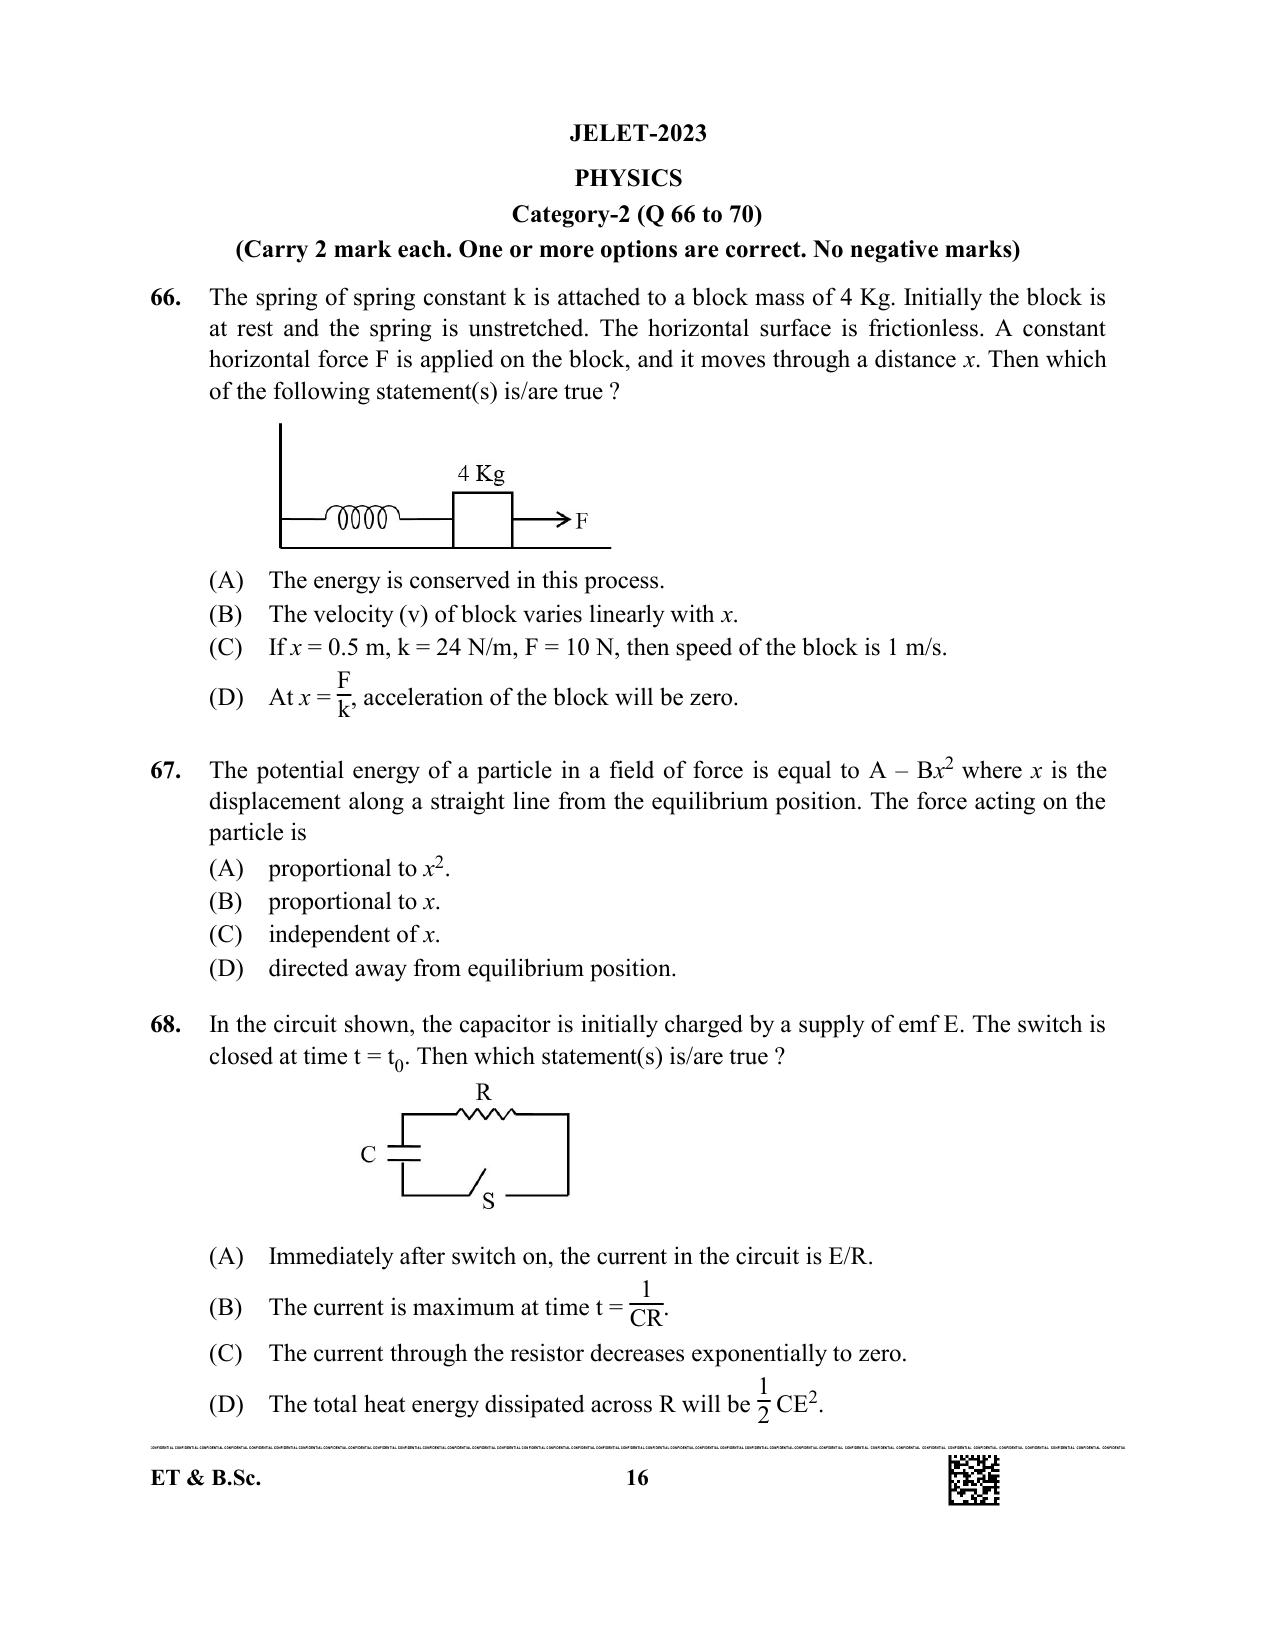 WBJEE JELET 2023 Paper I (ET & BSC) Question Papers - Page 16